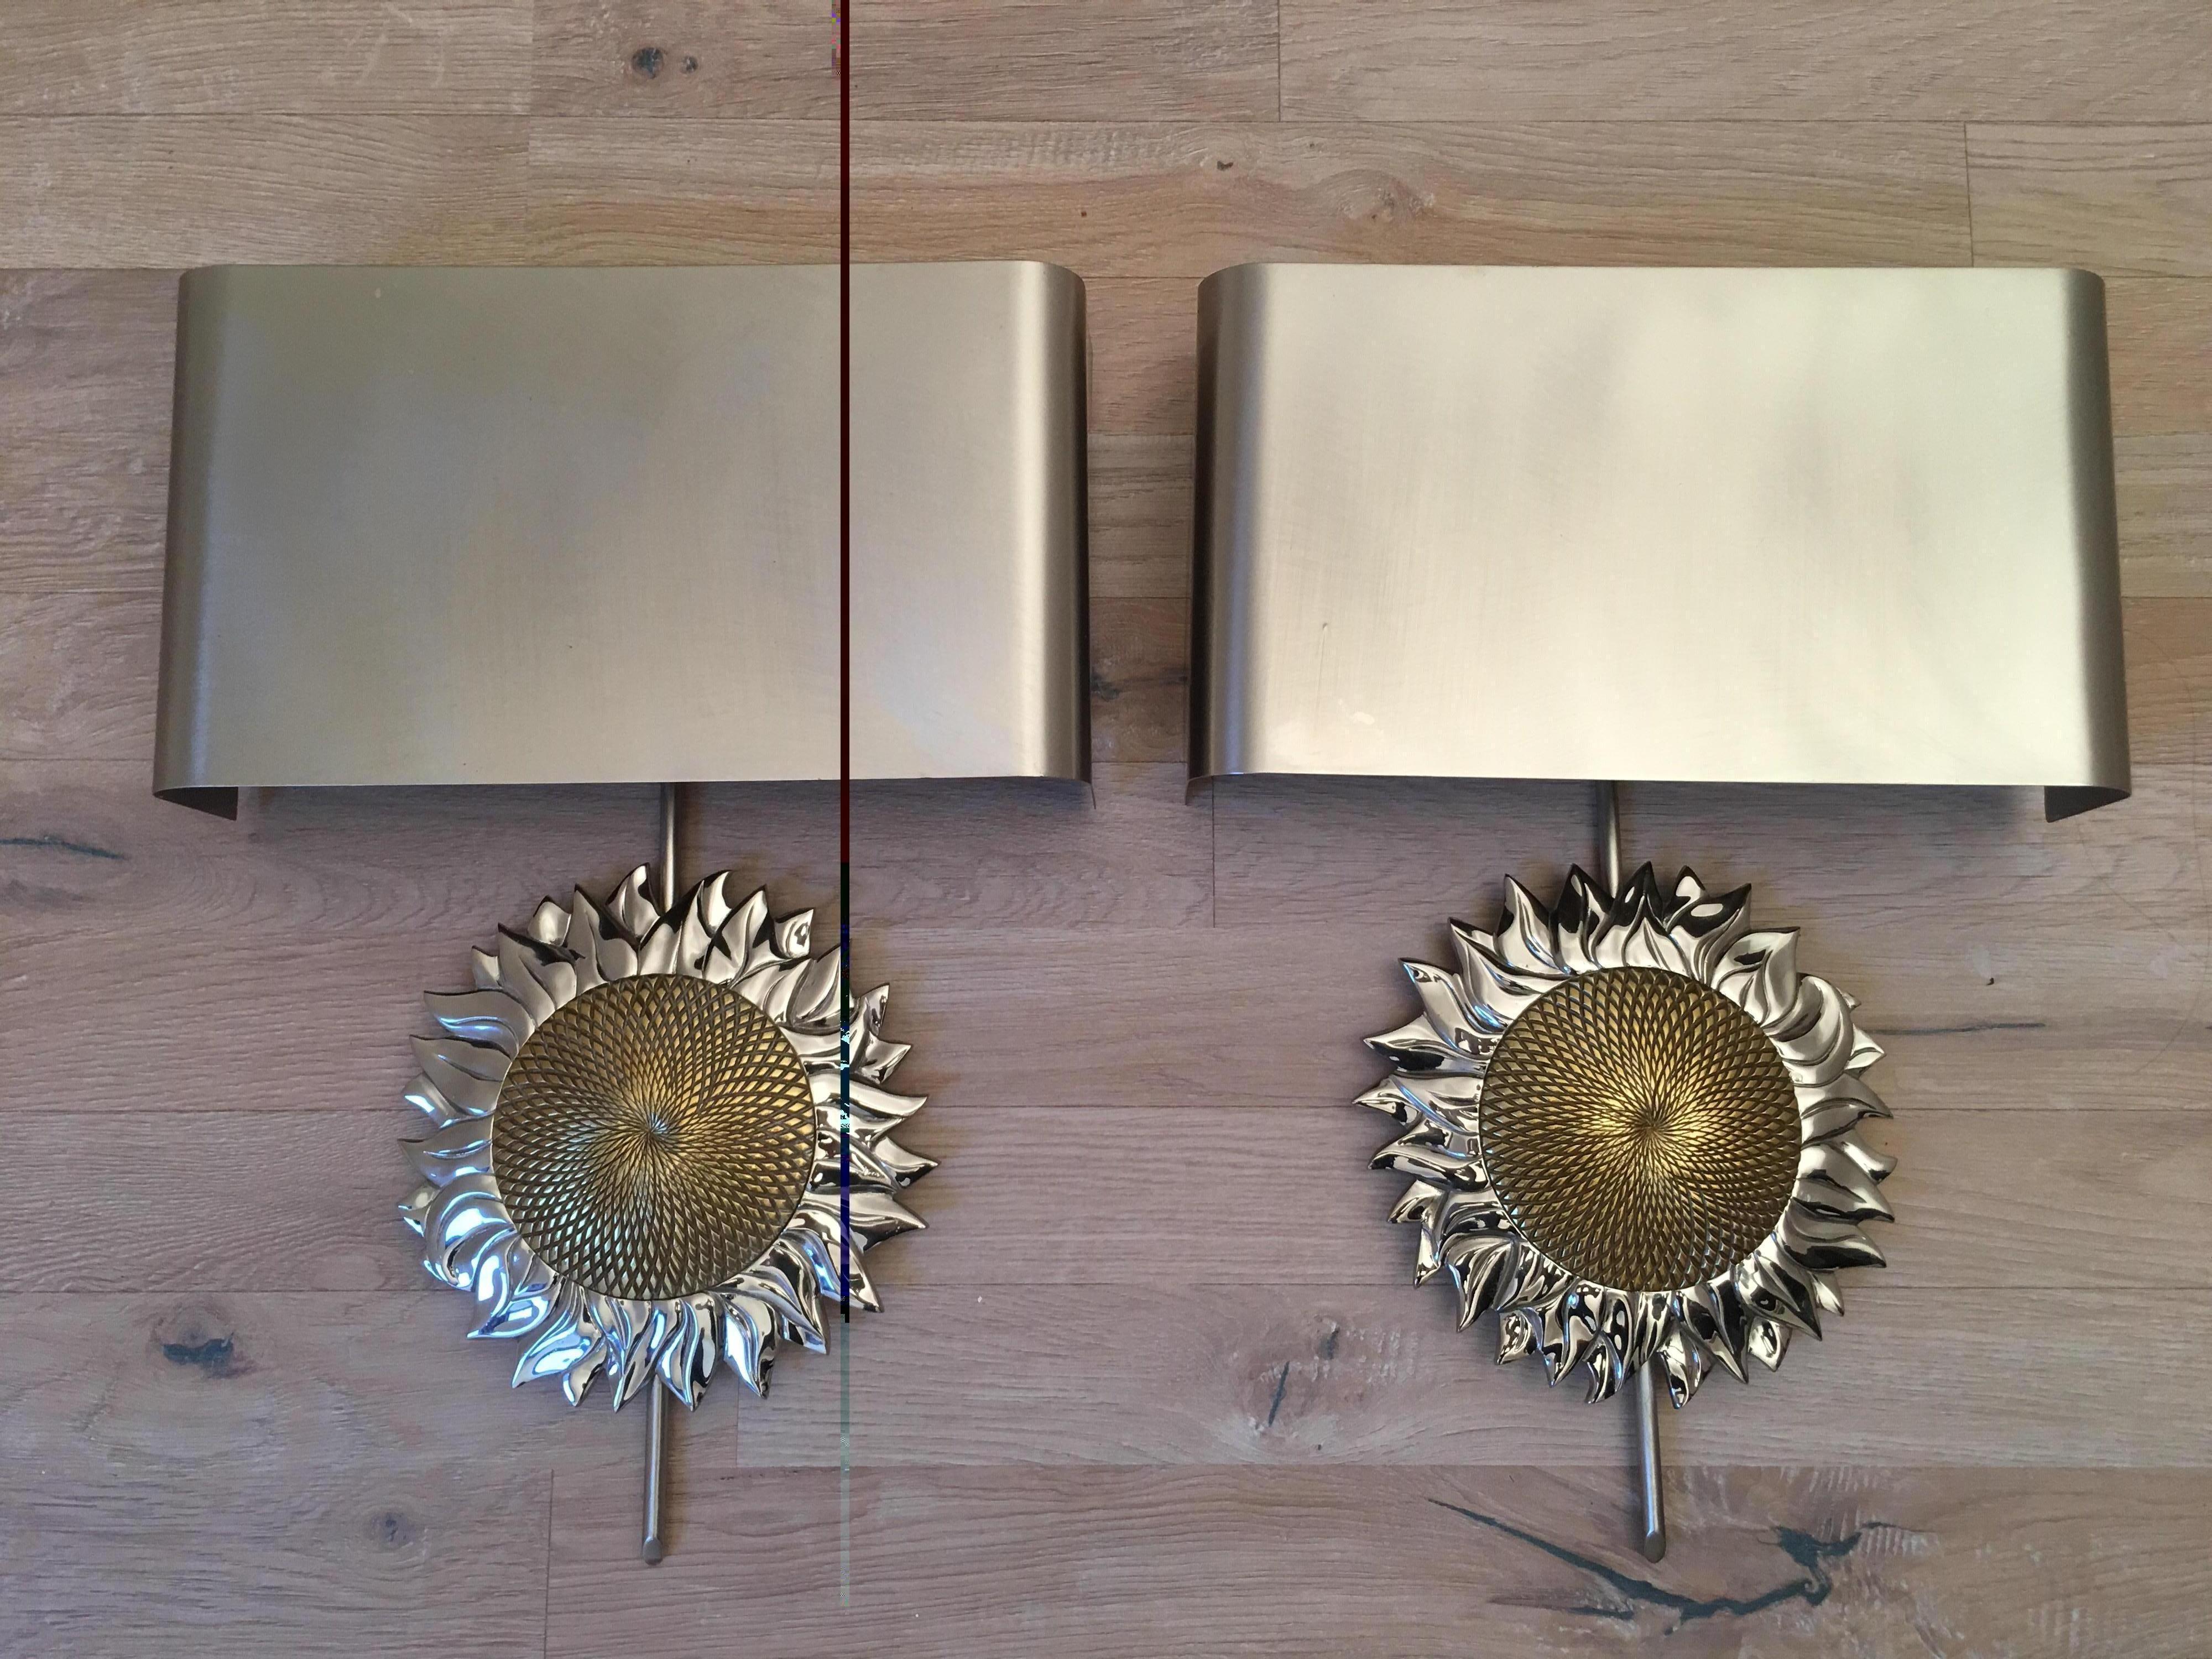 Discounted price especially fot Black Friday.
Pair of wall lights Sunflower designed by Maison Charles in 1970s.
Signed 